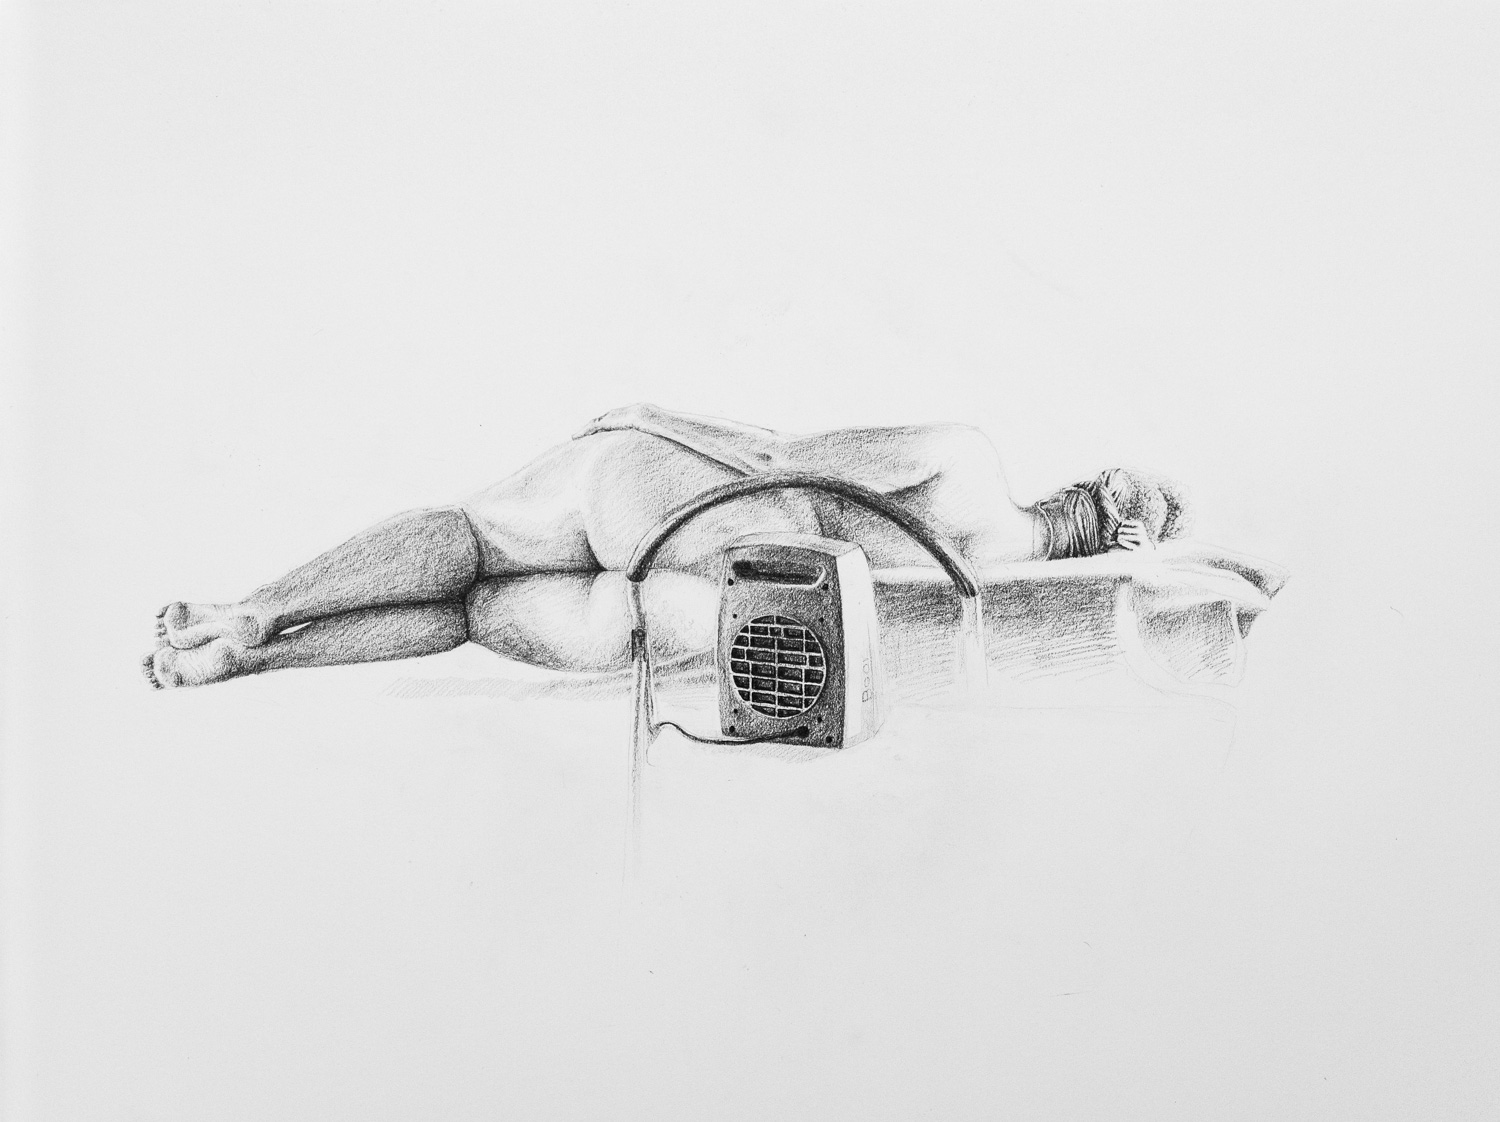 Drawing of a nude figure partially obstructed by a small heater in graphite.